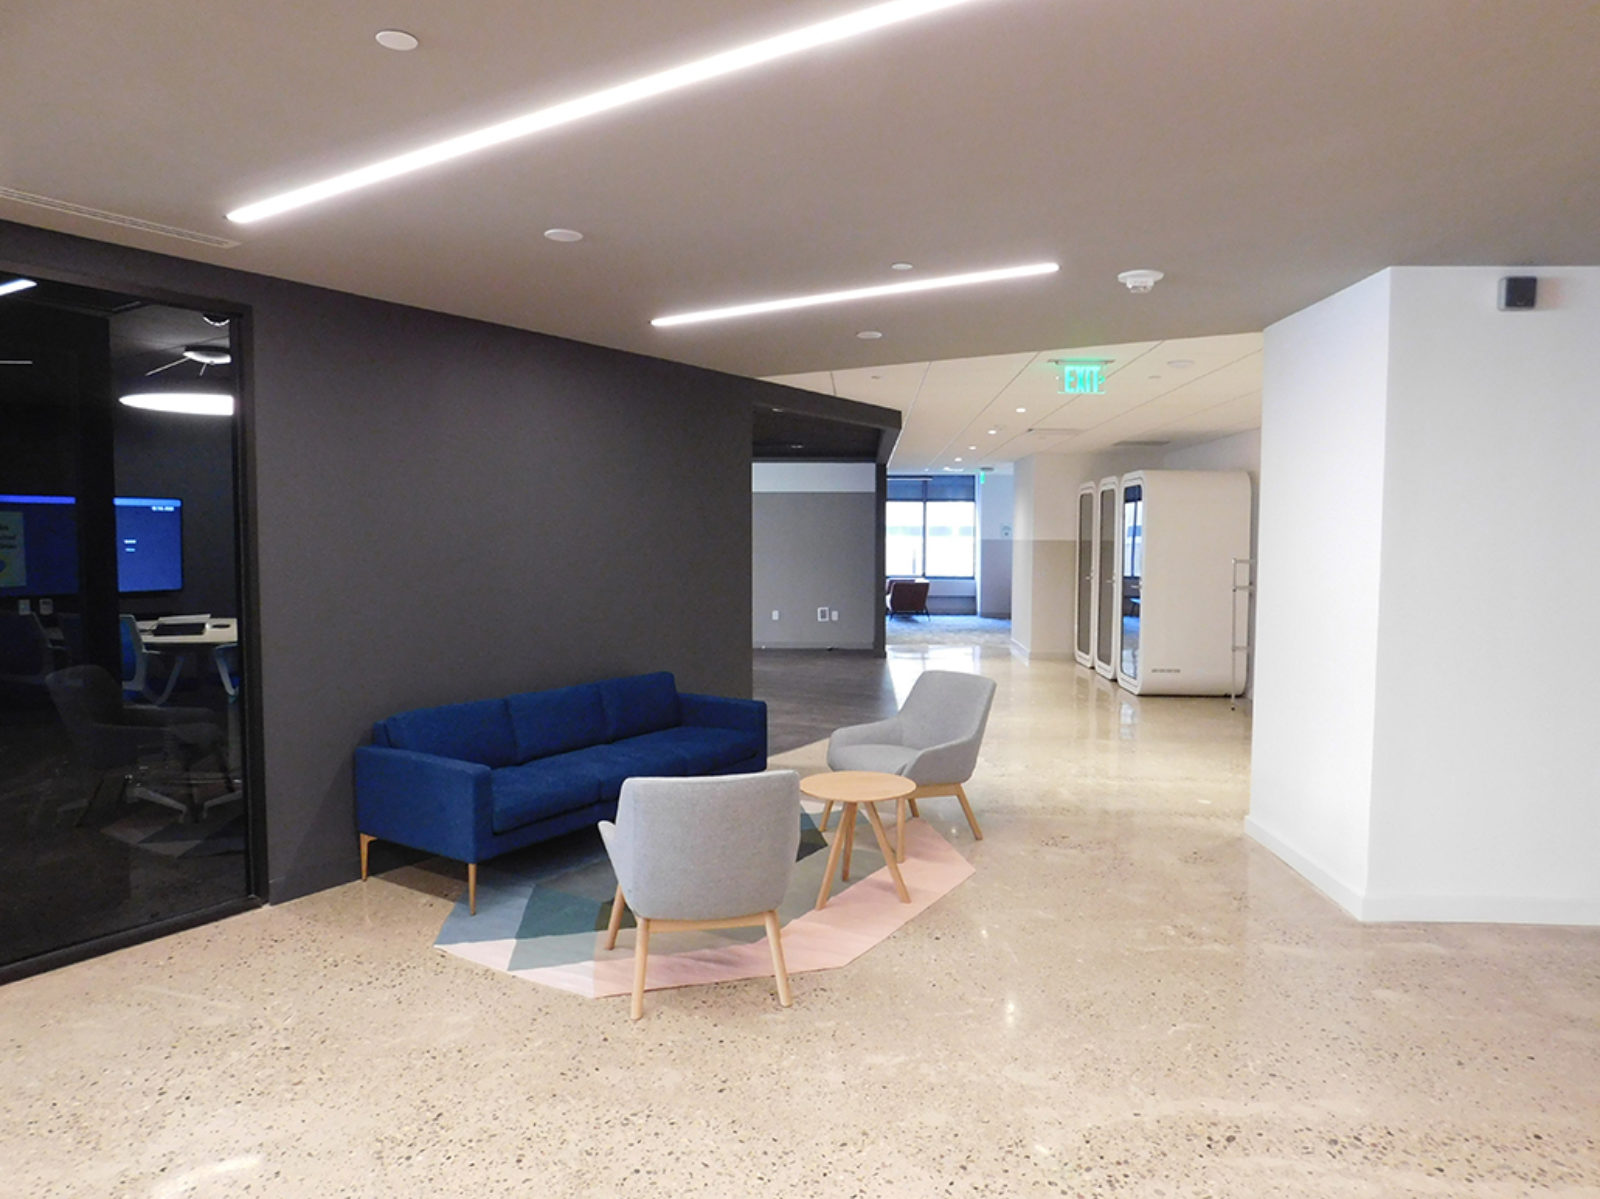 Lobby area with blue fabric sofa, light grey lounge chairs with small wooden tables in middle